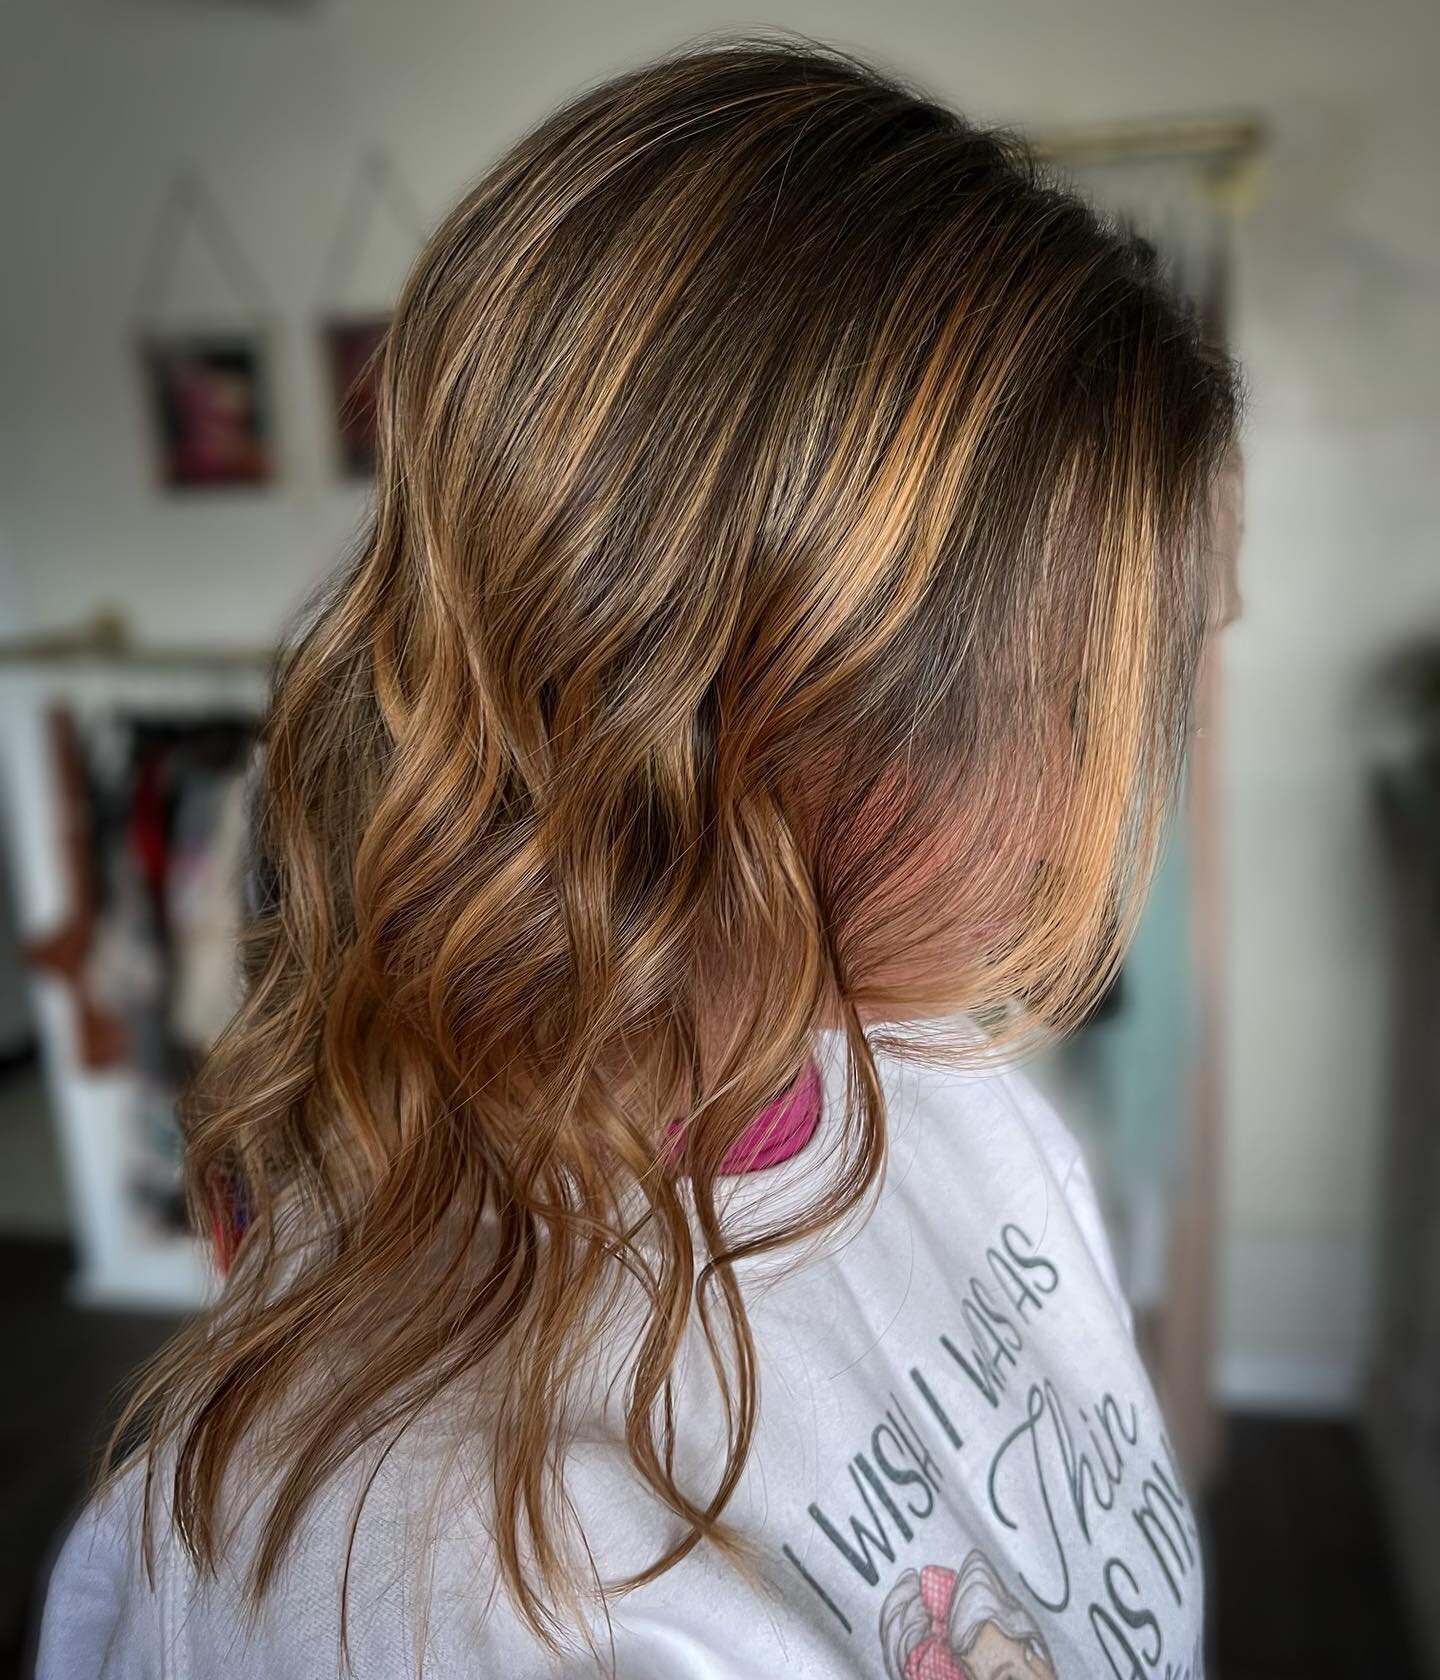 @gem.beauty.co came to G&amp;R&rsquo;s team ready to slay slay slay. This golden copper was achieved with @moroccanoilpro ! 👏🏼👏🏼

#ohiosalon #salon #sustainablesalon #sustainable #sustainablebeauty #kevinmurphy #moroccanoil #defi #defianceohio #o